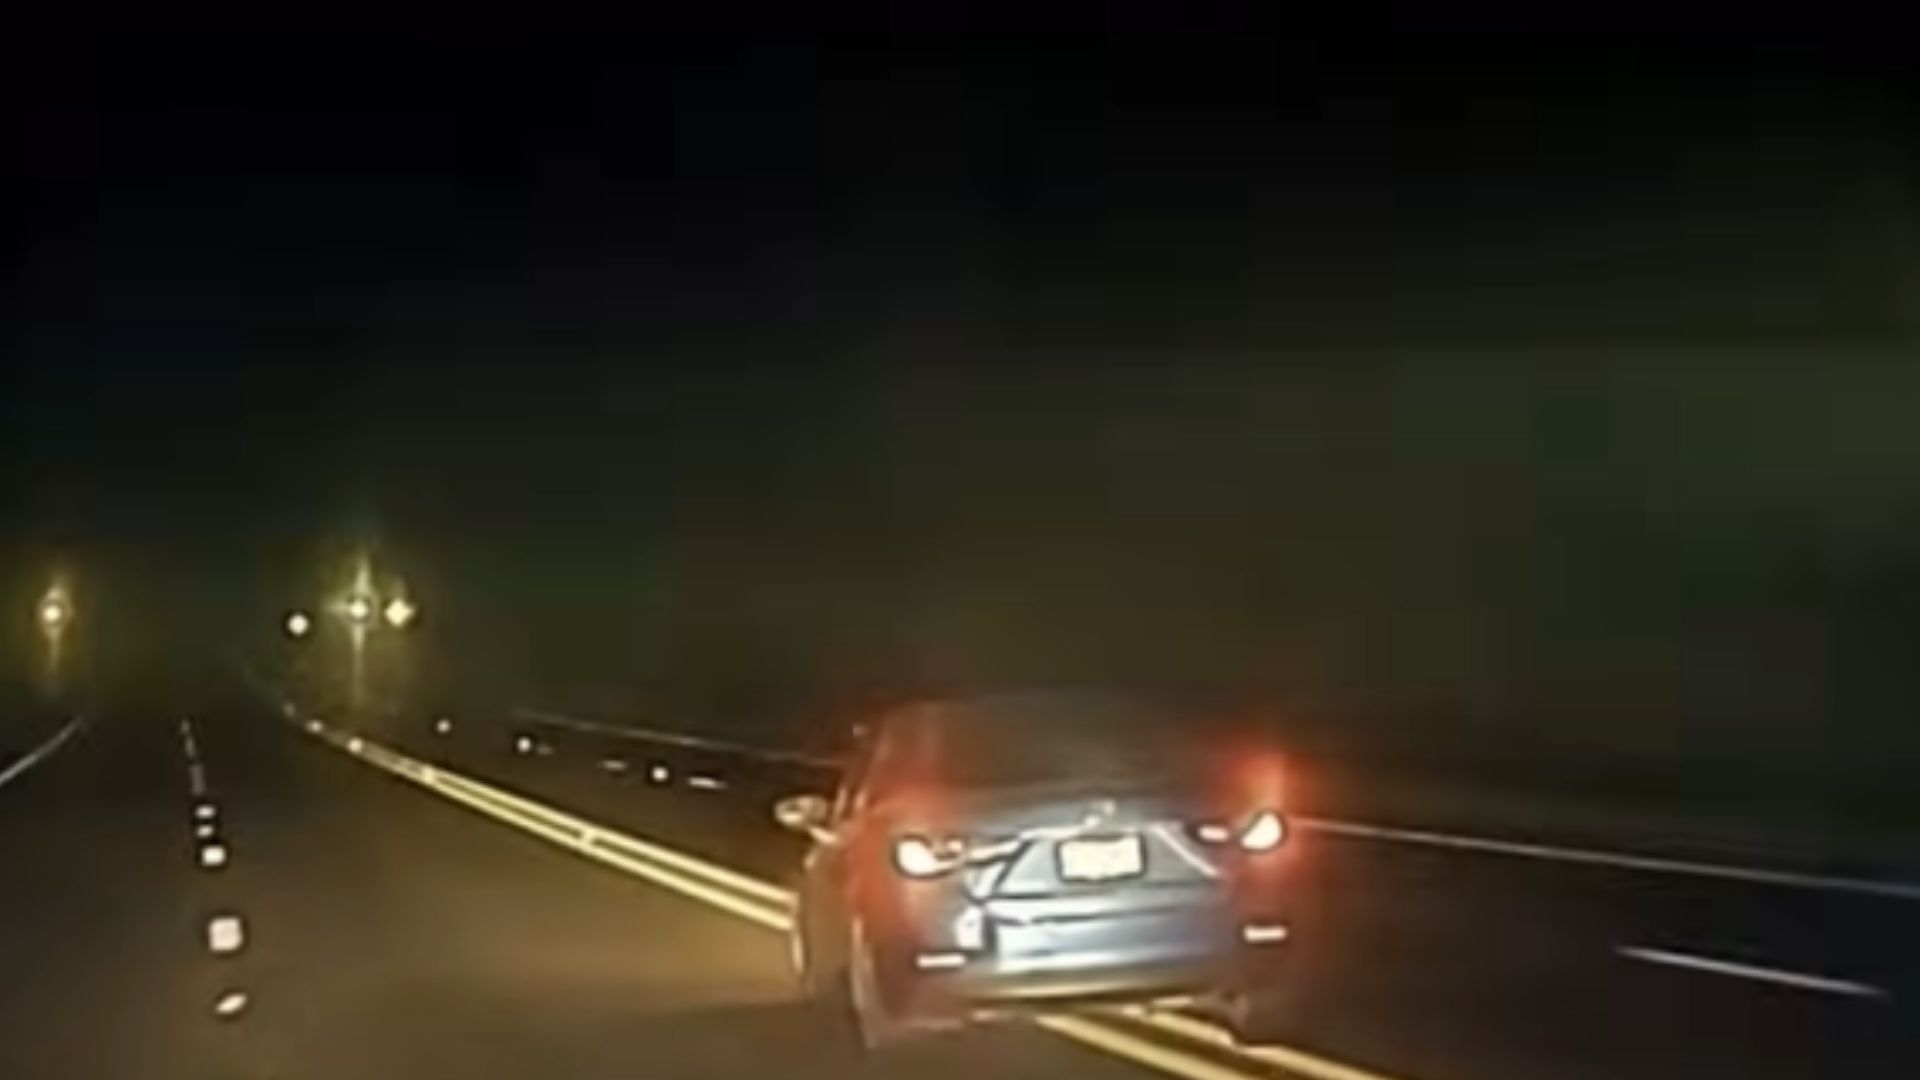 Suspect In Crappy Car Slips Multiple PITs